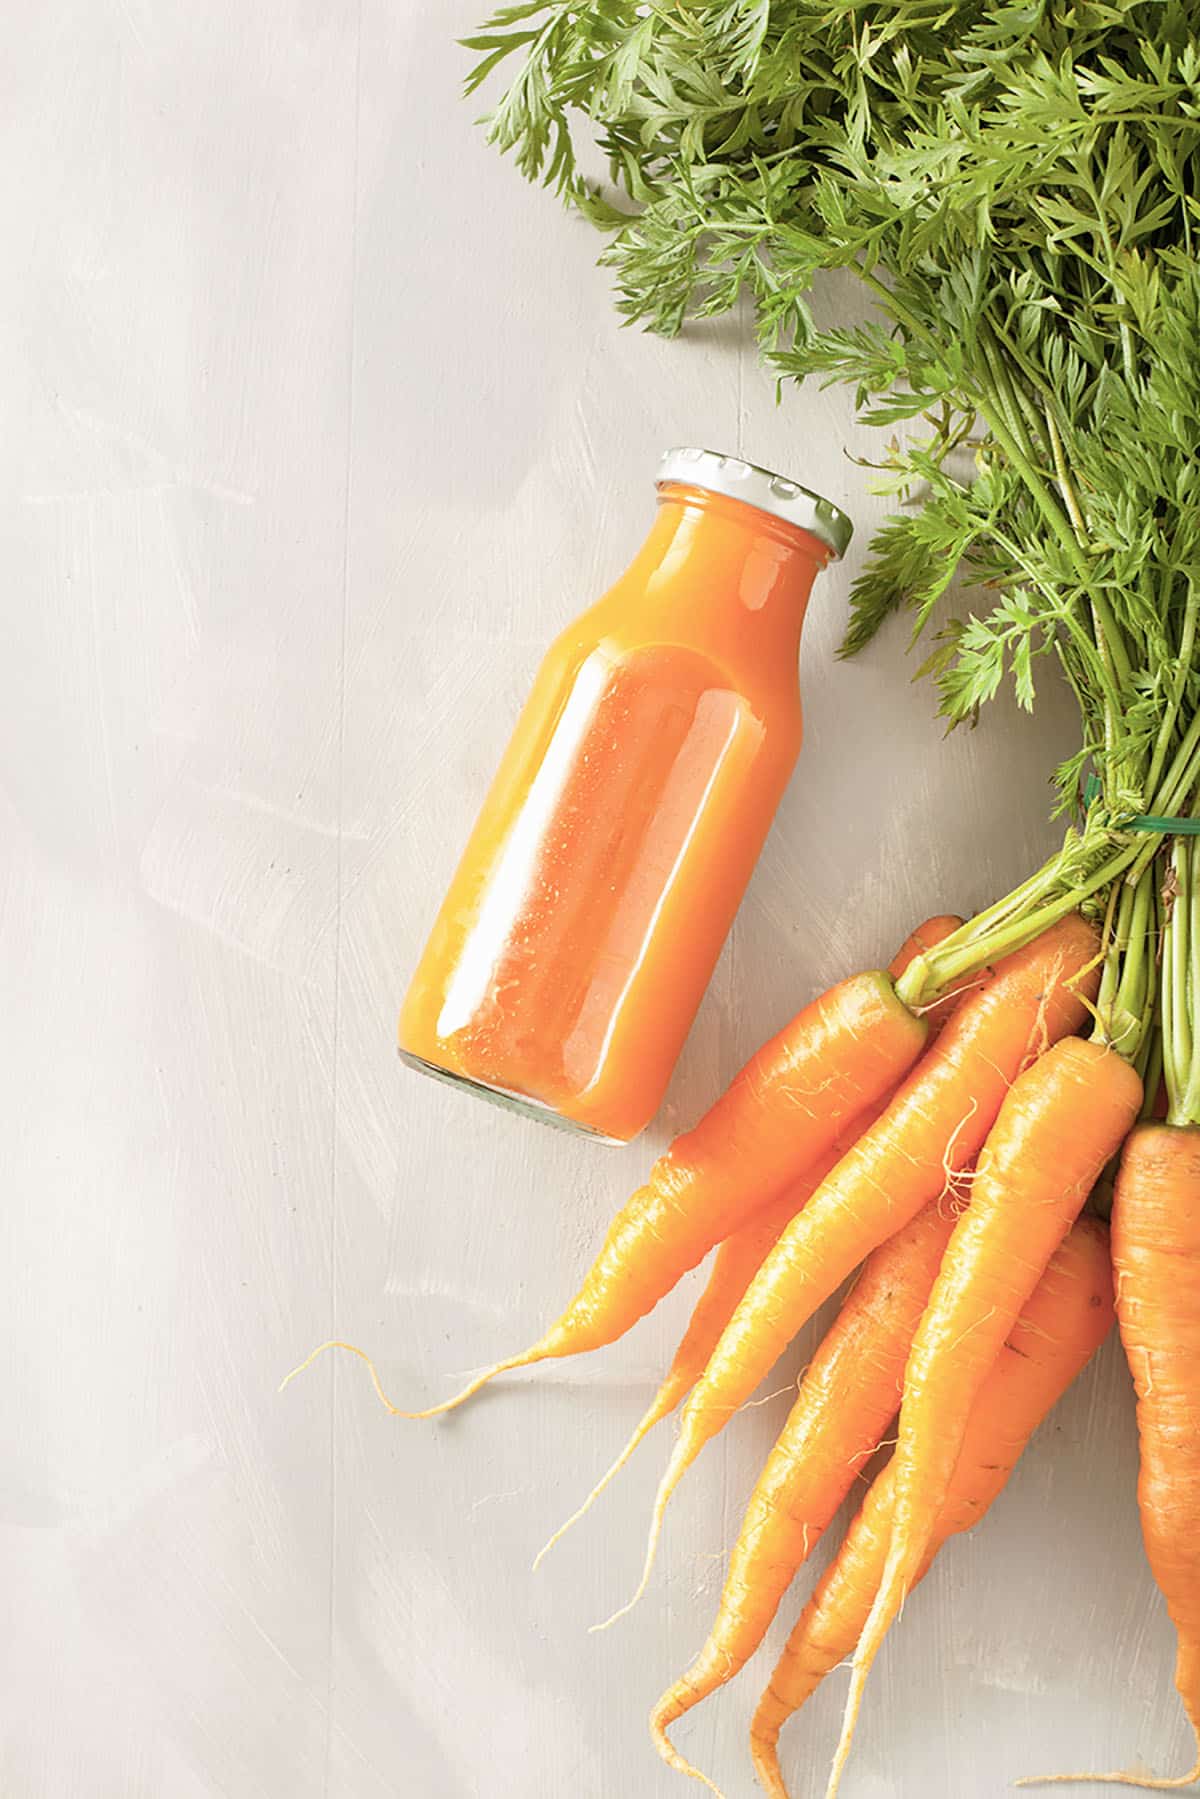 fruit and vegetable smoothie in glass jar, orange carrot